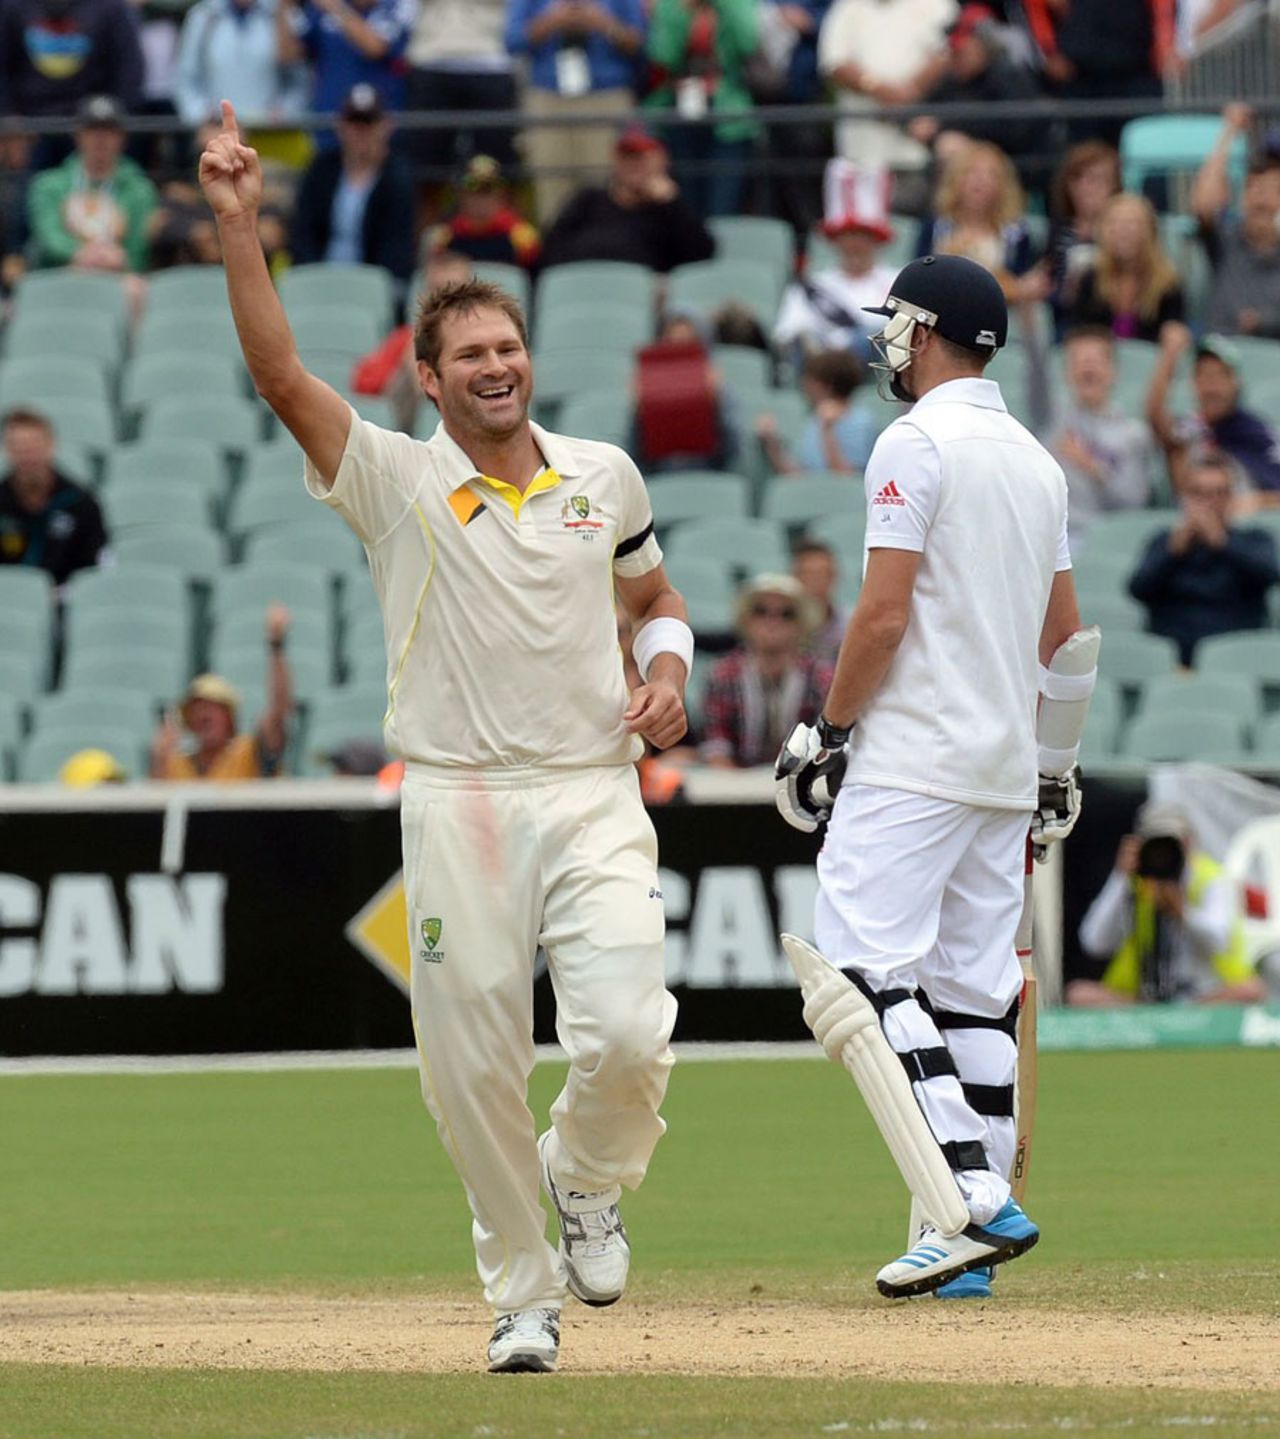 Ryan Harris completed victory with the final wicket of Monty Panesar, Australia v England, 2nd Test, Adelaide, 5th day, December 9, 2013